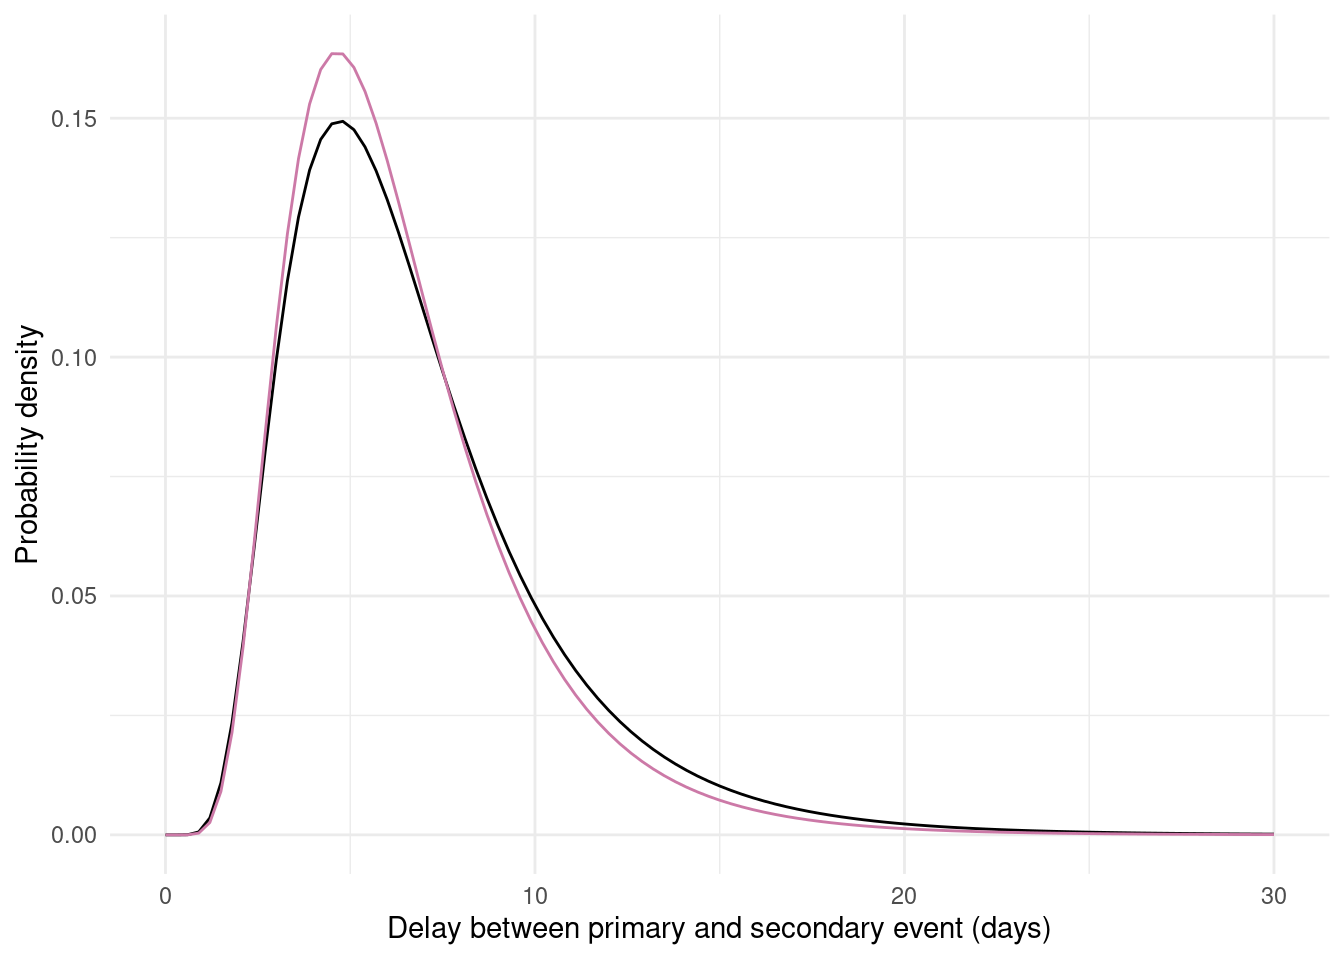 A fitted delay distribution (in pink) as compared with the true delay distribution (in black).